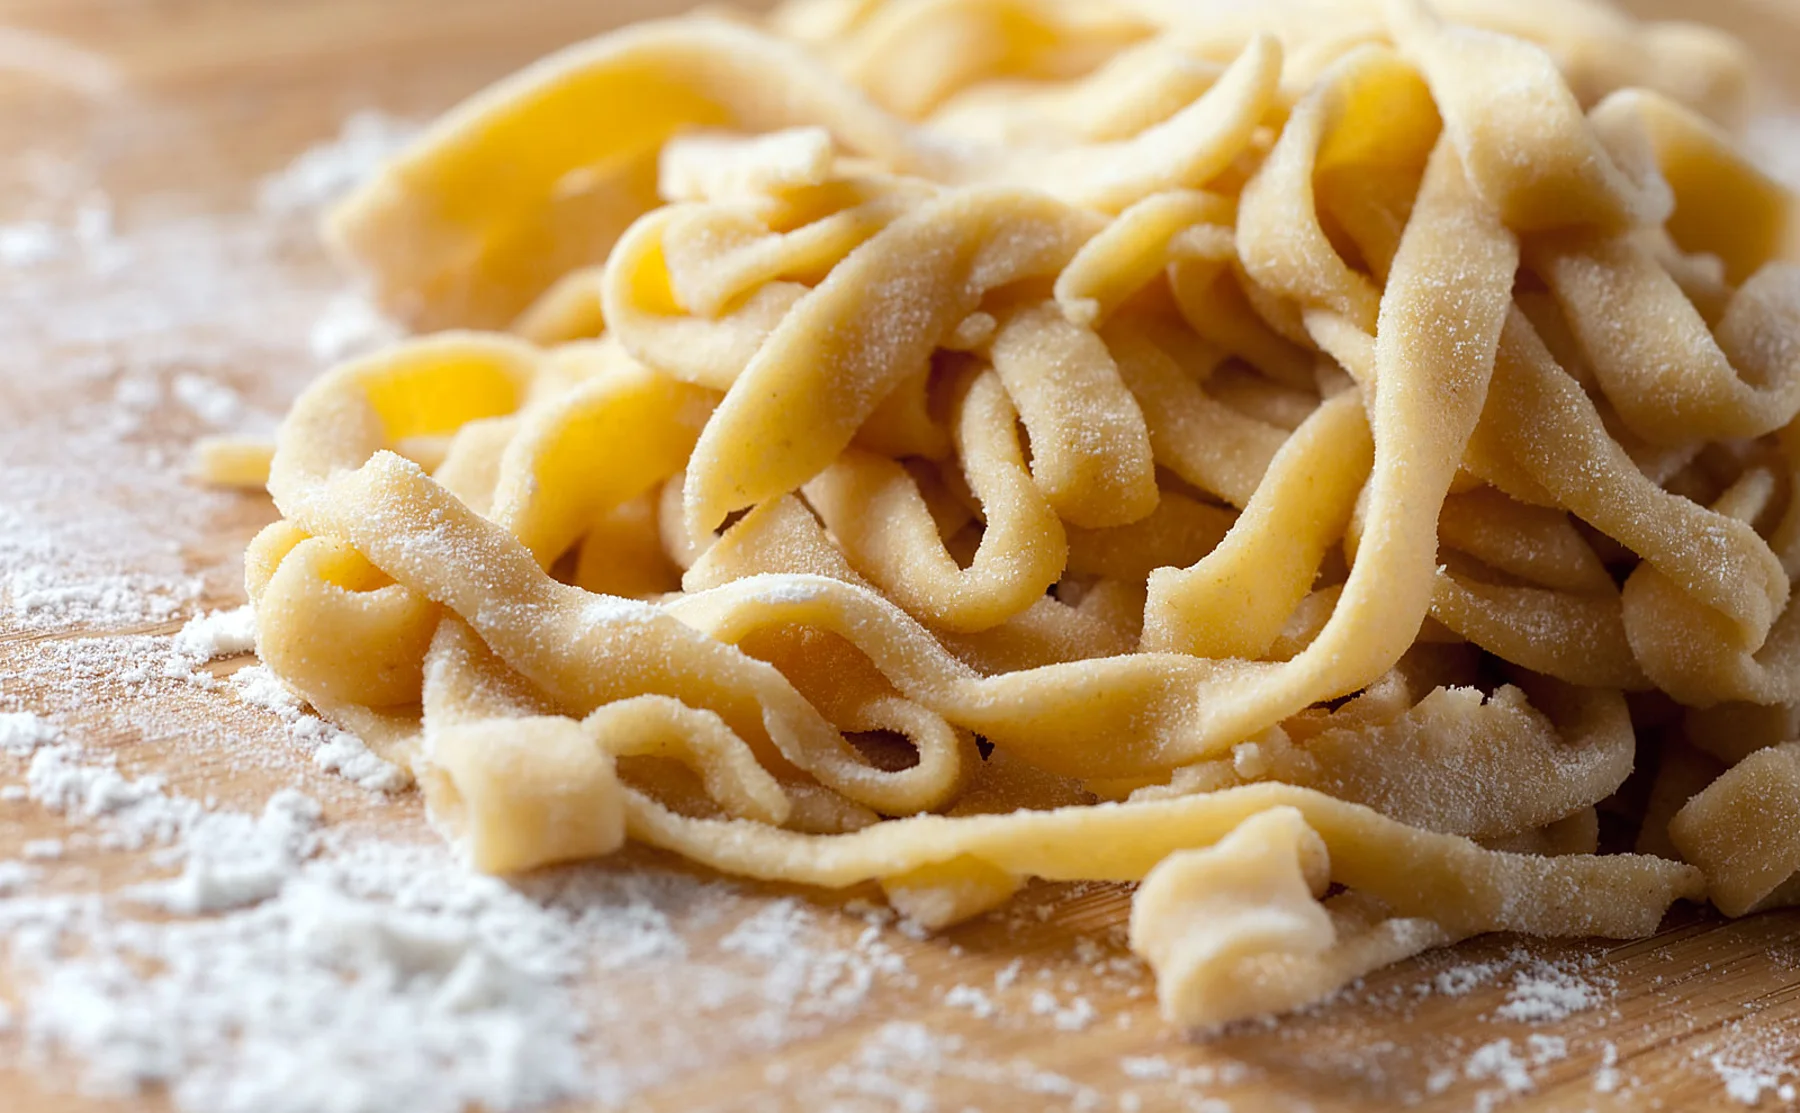 Florence food tour and semi-private cooking masterclass with a local chef - 1512915